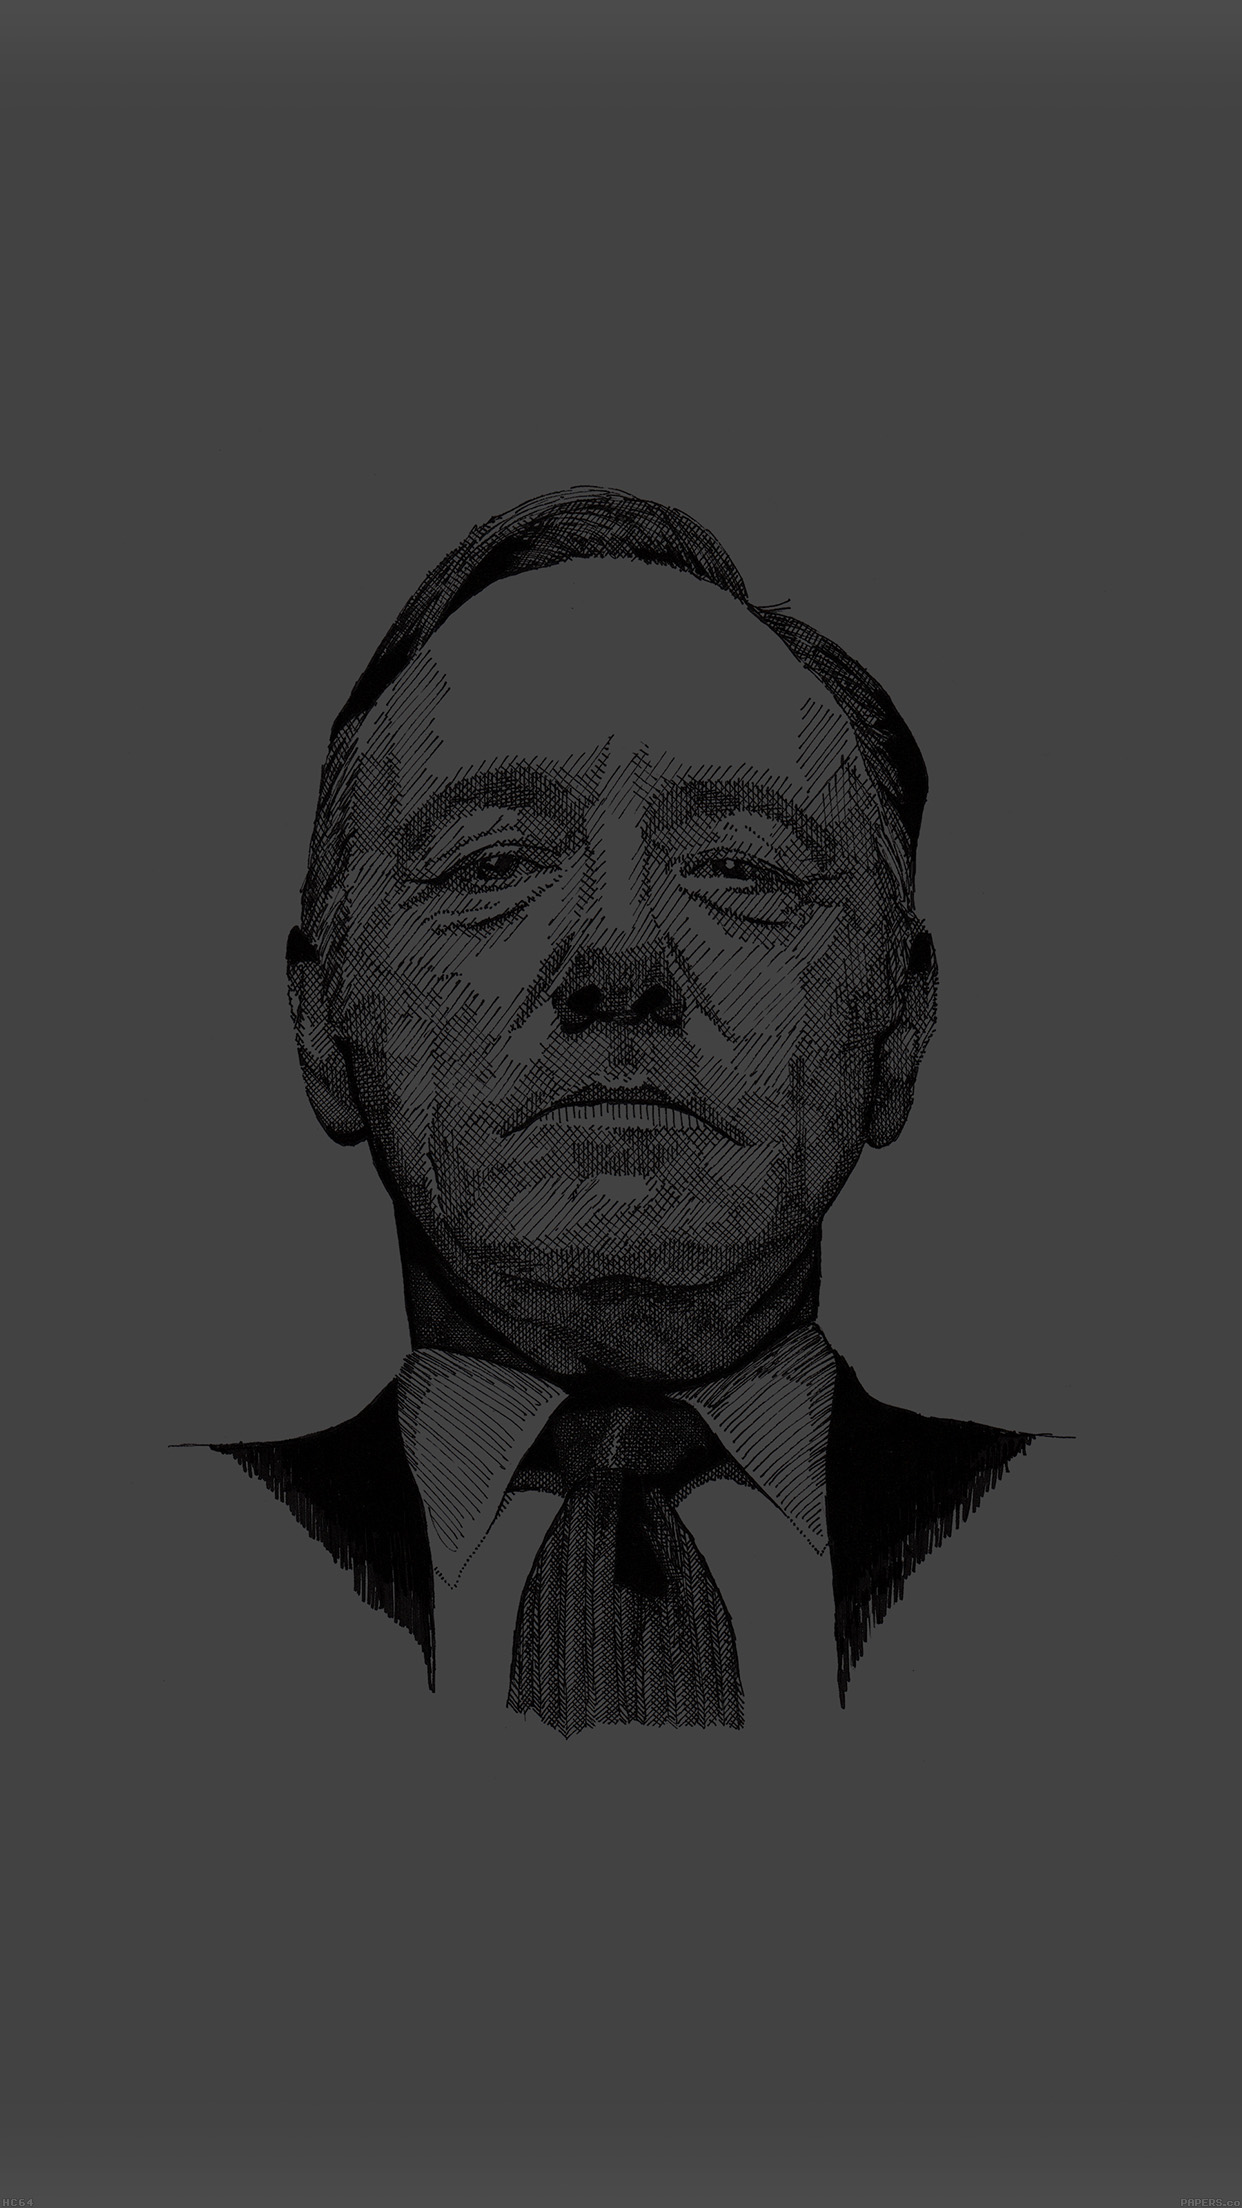 house of cards wallpaper,face,head,illustration,chin,forehead